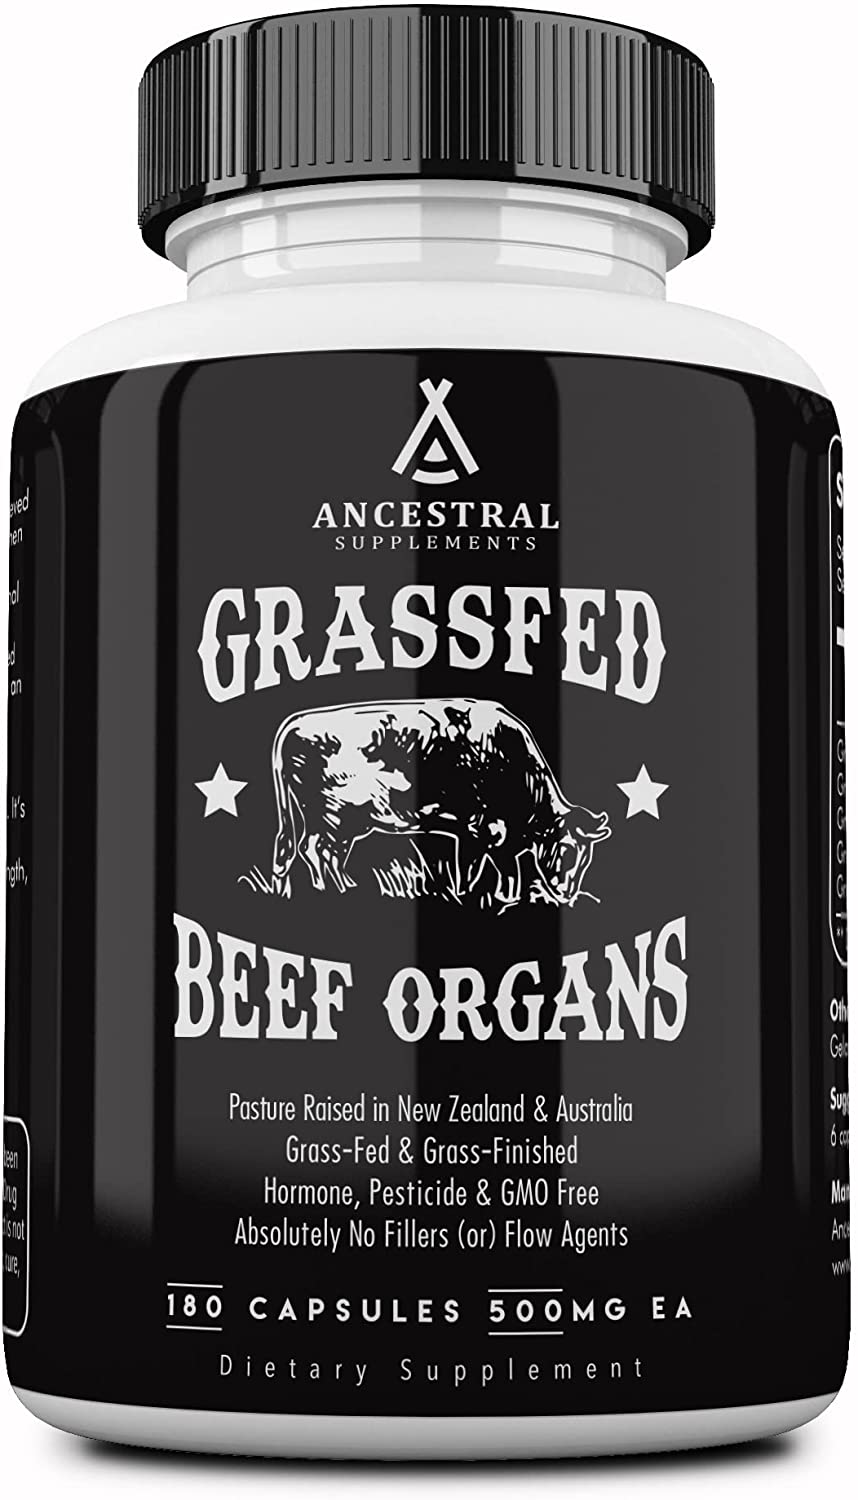 Ancestral Supplements Grass Fed Beef Organs (Desiccated)